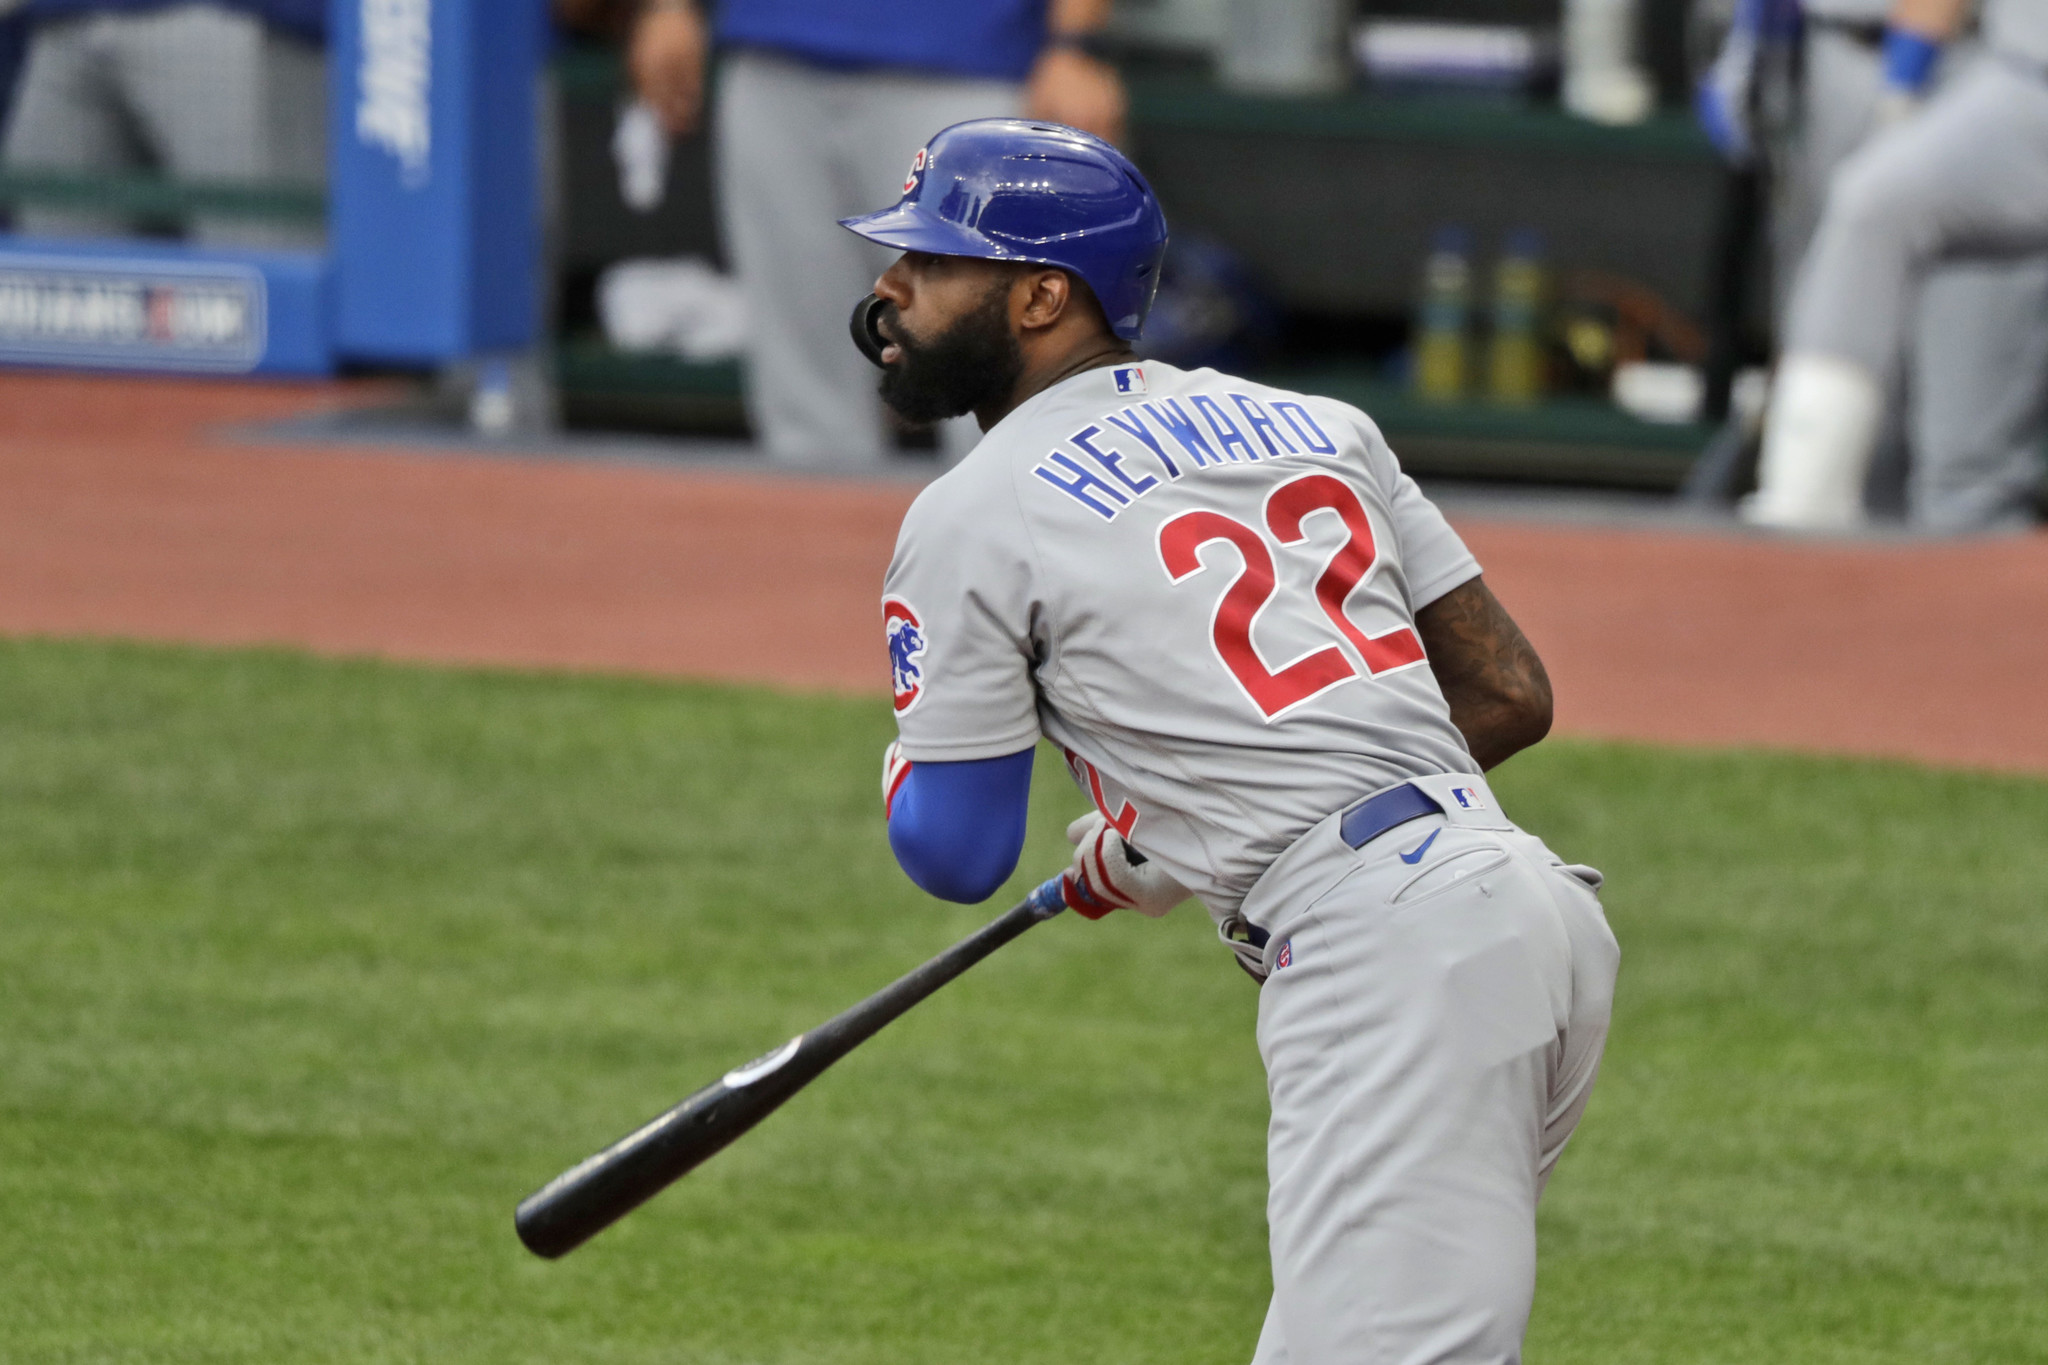 Chicago Cubs' Jason Heyward shows off his World Series ring as he is being  honored during the team's baseball game against the Cincinnati Reds in  Chicago, Saturday, Oct. 1, 2022. (AP Photo/Matt